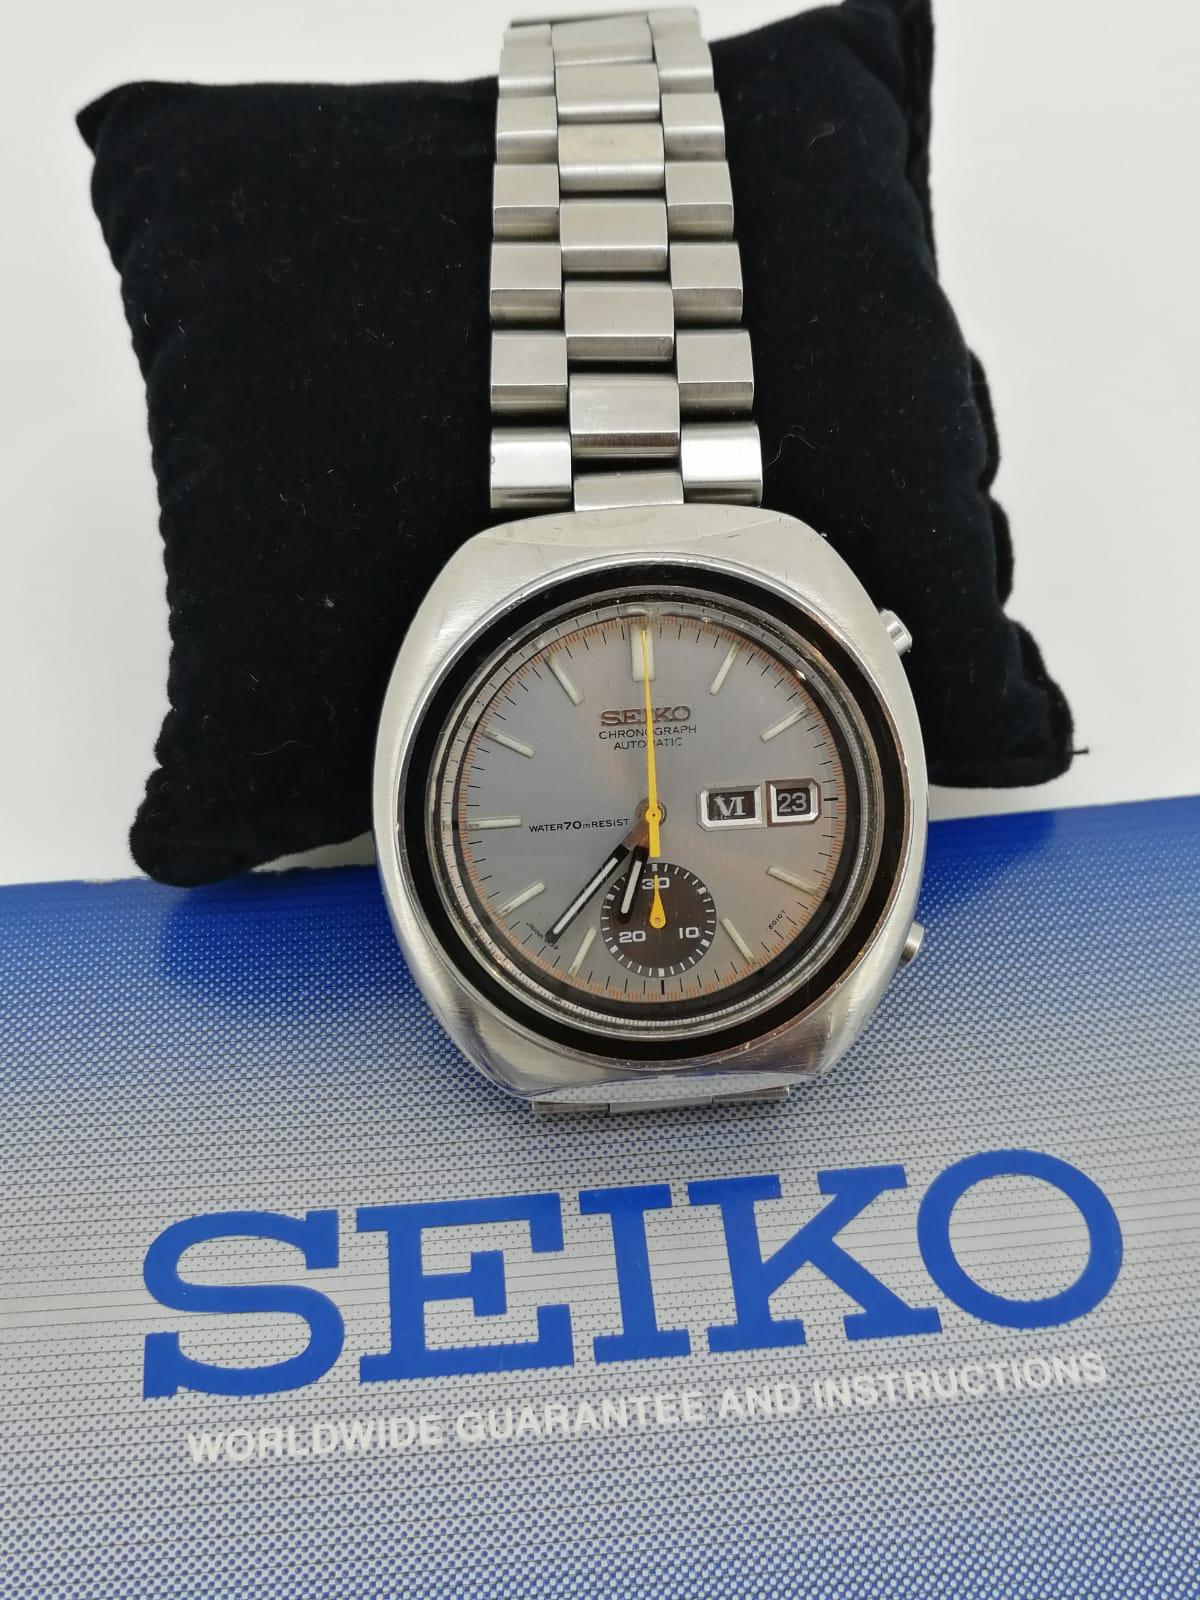 Seiko Chronograph ref 6139-8001 Japan Automatic 17 jewels c1969 Mens' Watch In Excellent Condition For Sale In MELBOURNE, AU